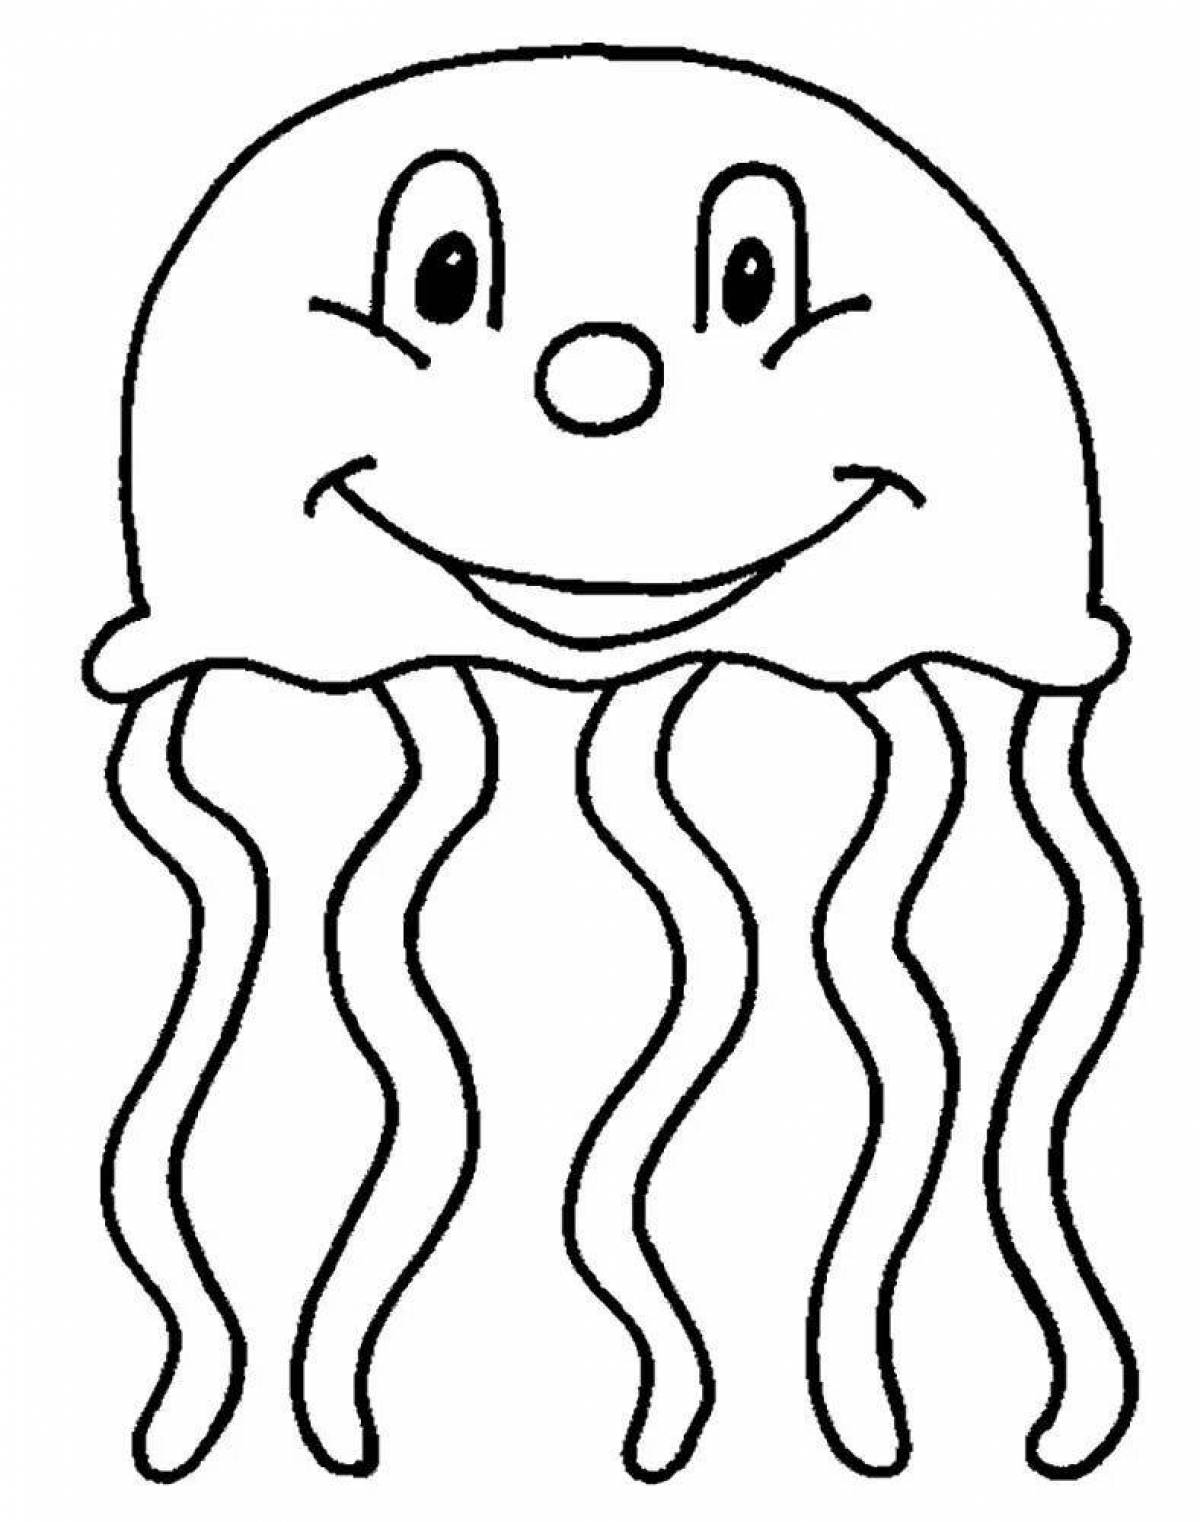 Adorable jellyfish coloring book for kids